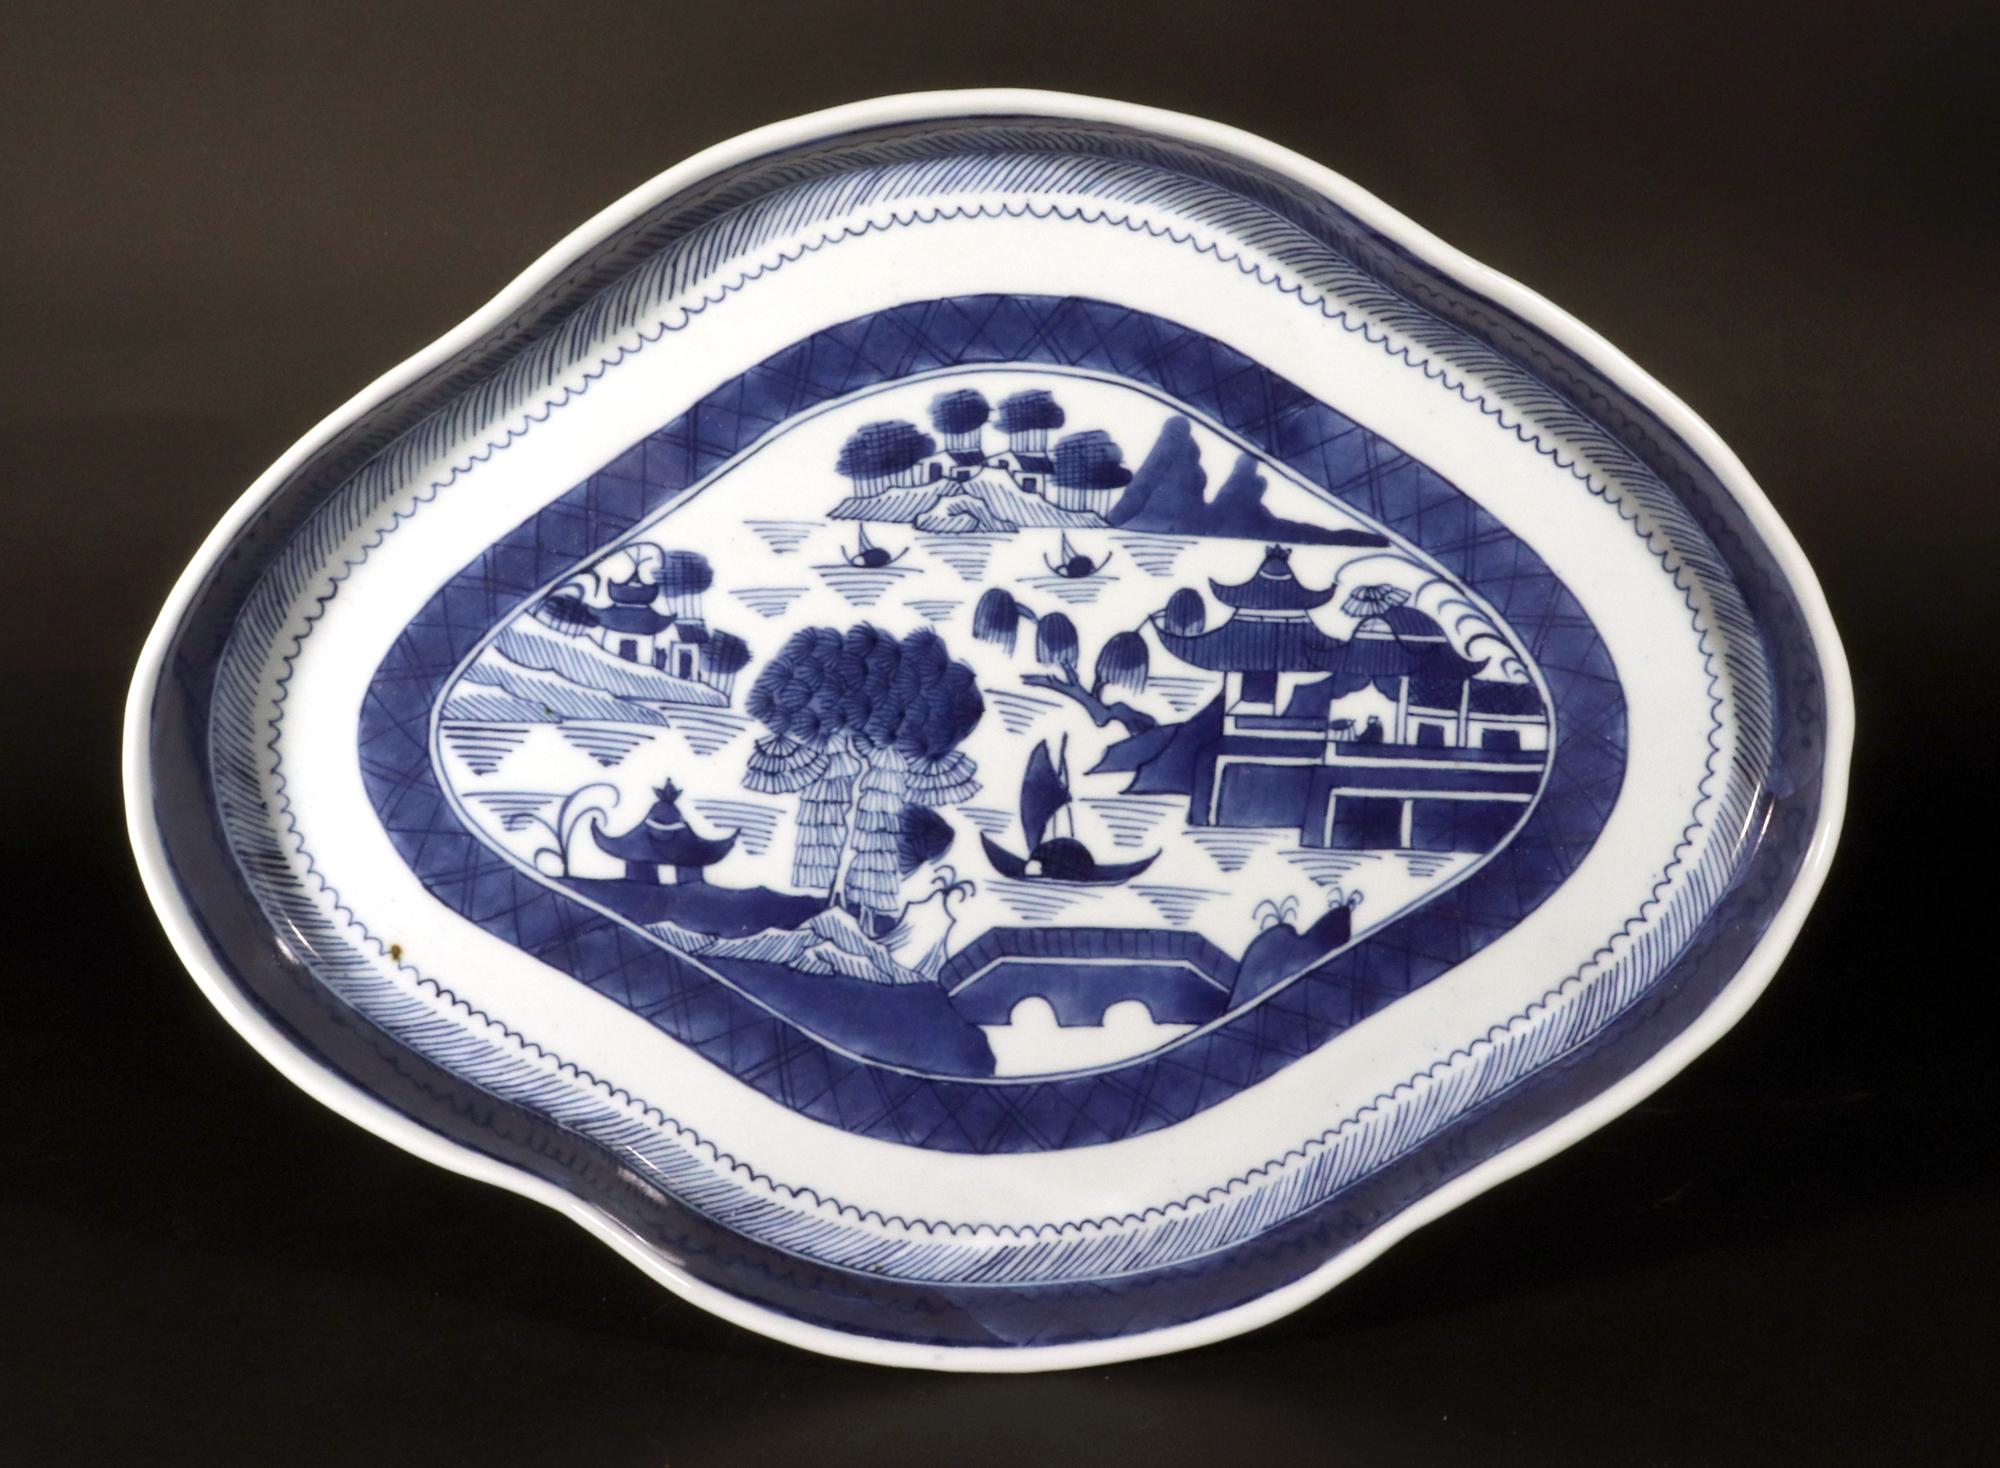 Chinese Export Canton Nankin Blue & White Porcelain Tray,
Circa 1810-20

The oval large Chinese Nankin porcelain oval tray is decorated in underglaze blue and white with a riverscape scene of islands with buildings sand trees with ships sailing on